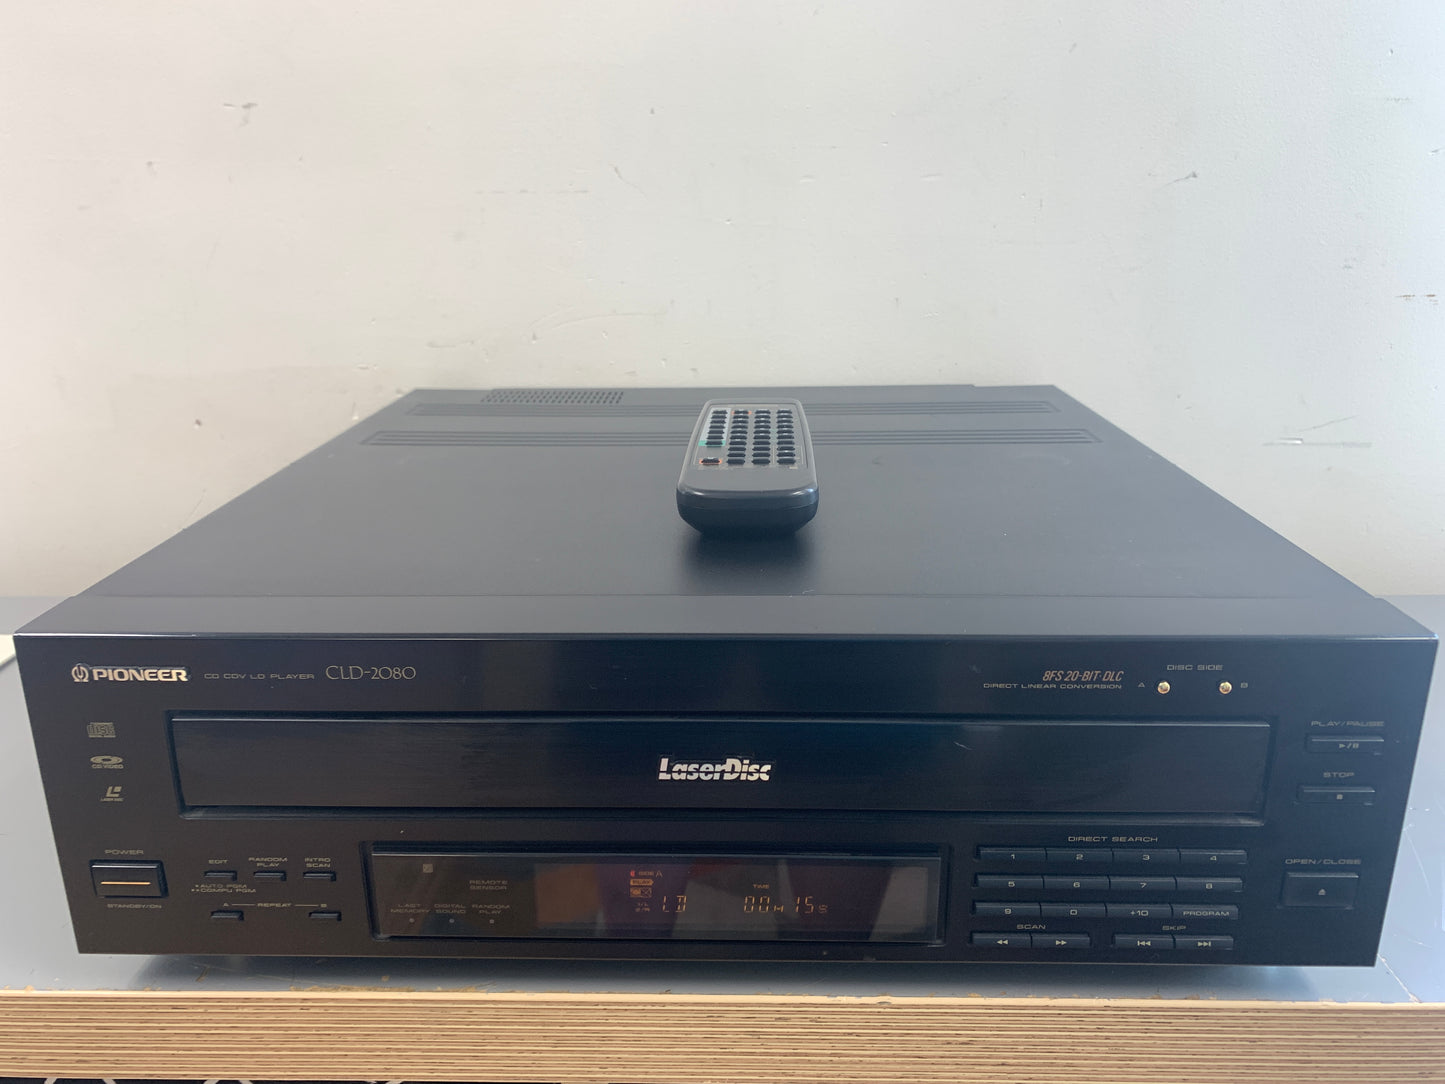 Pioneer CLD-2080 Laserdisc/CD Player * Remote Control